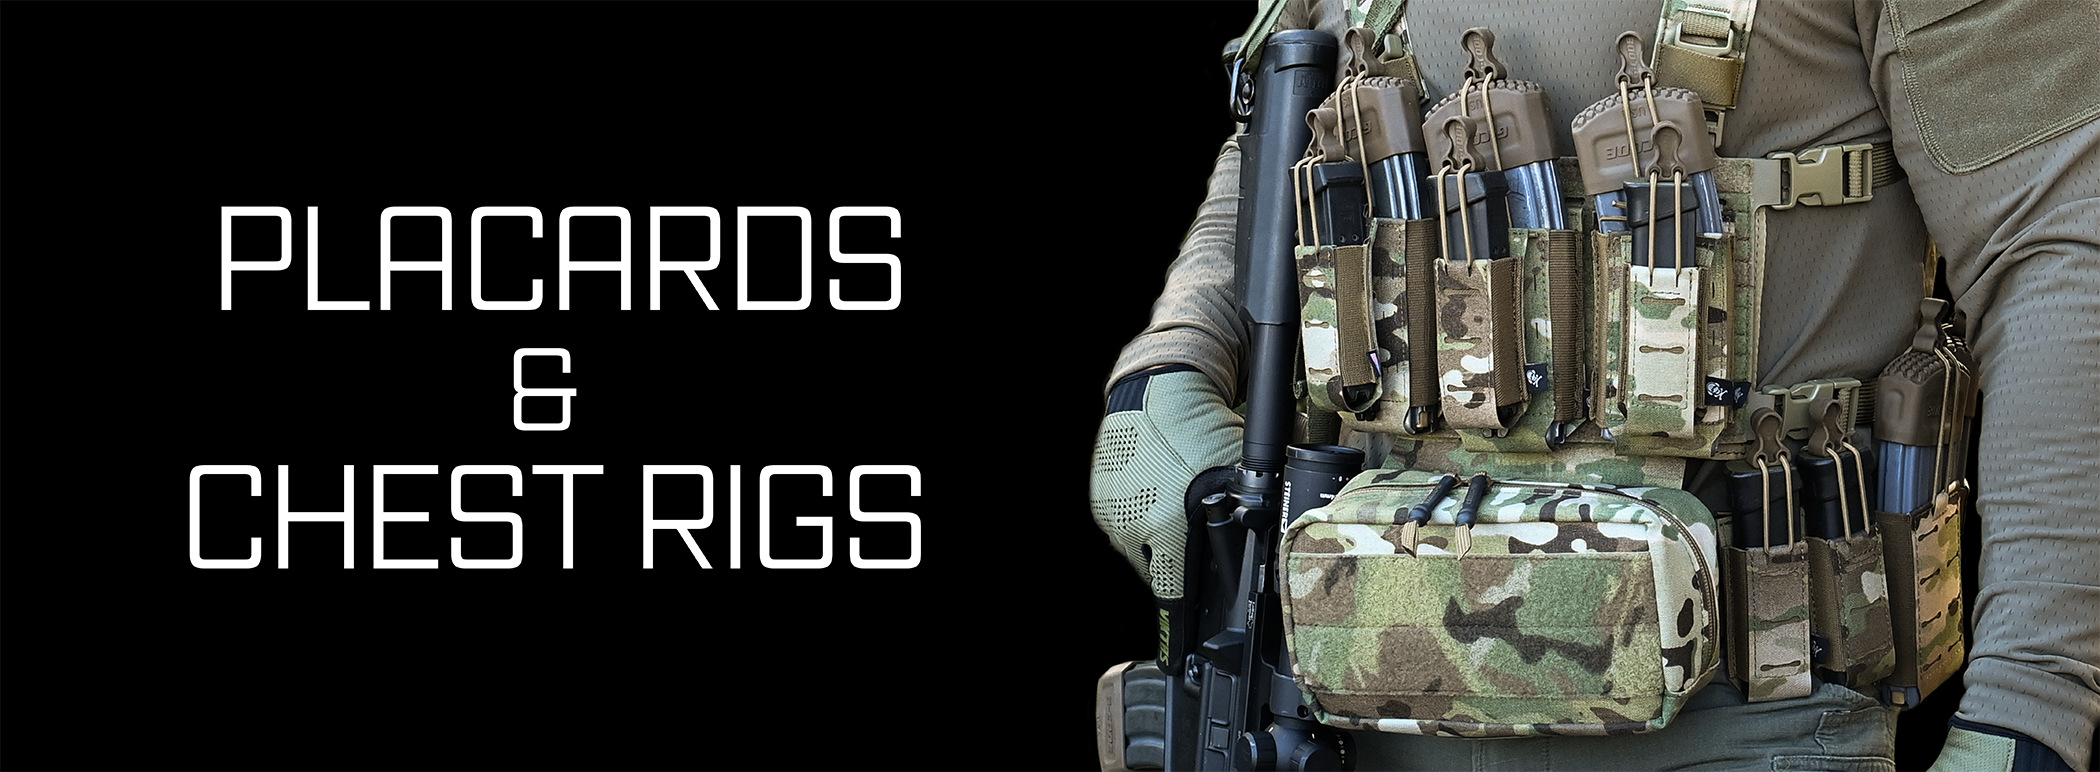 Placards and Chest Rigs - tactical holsters and equipment